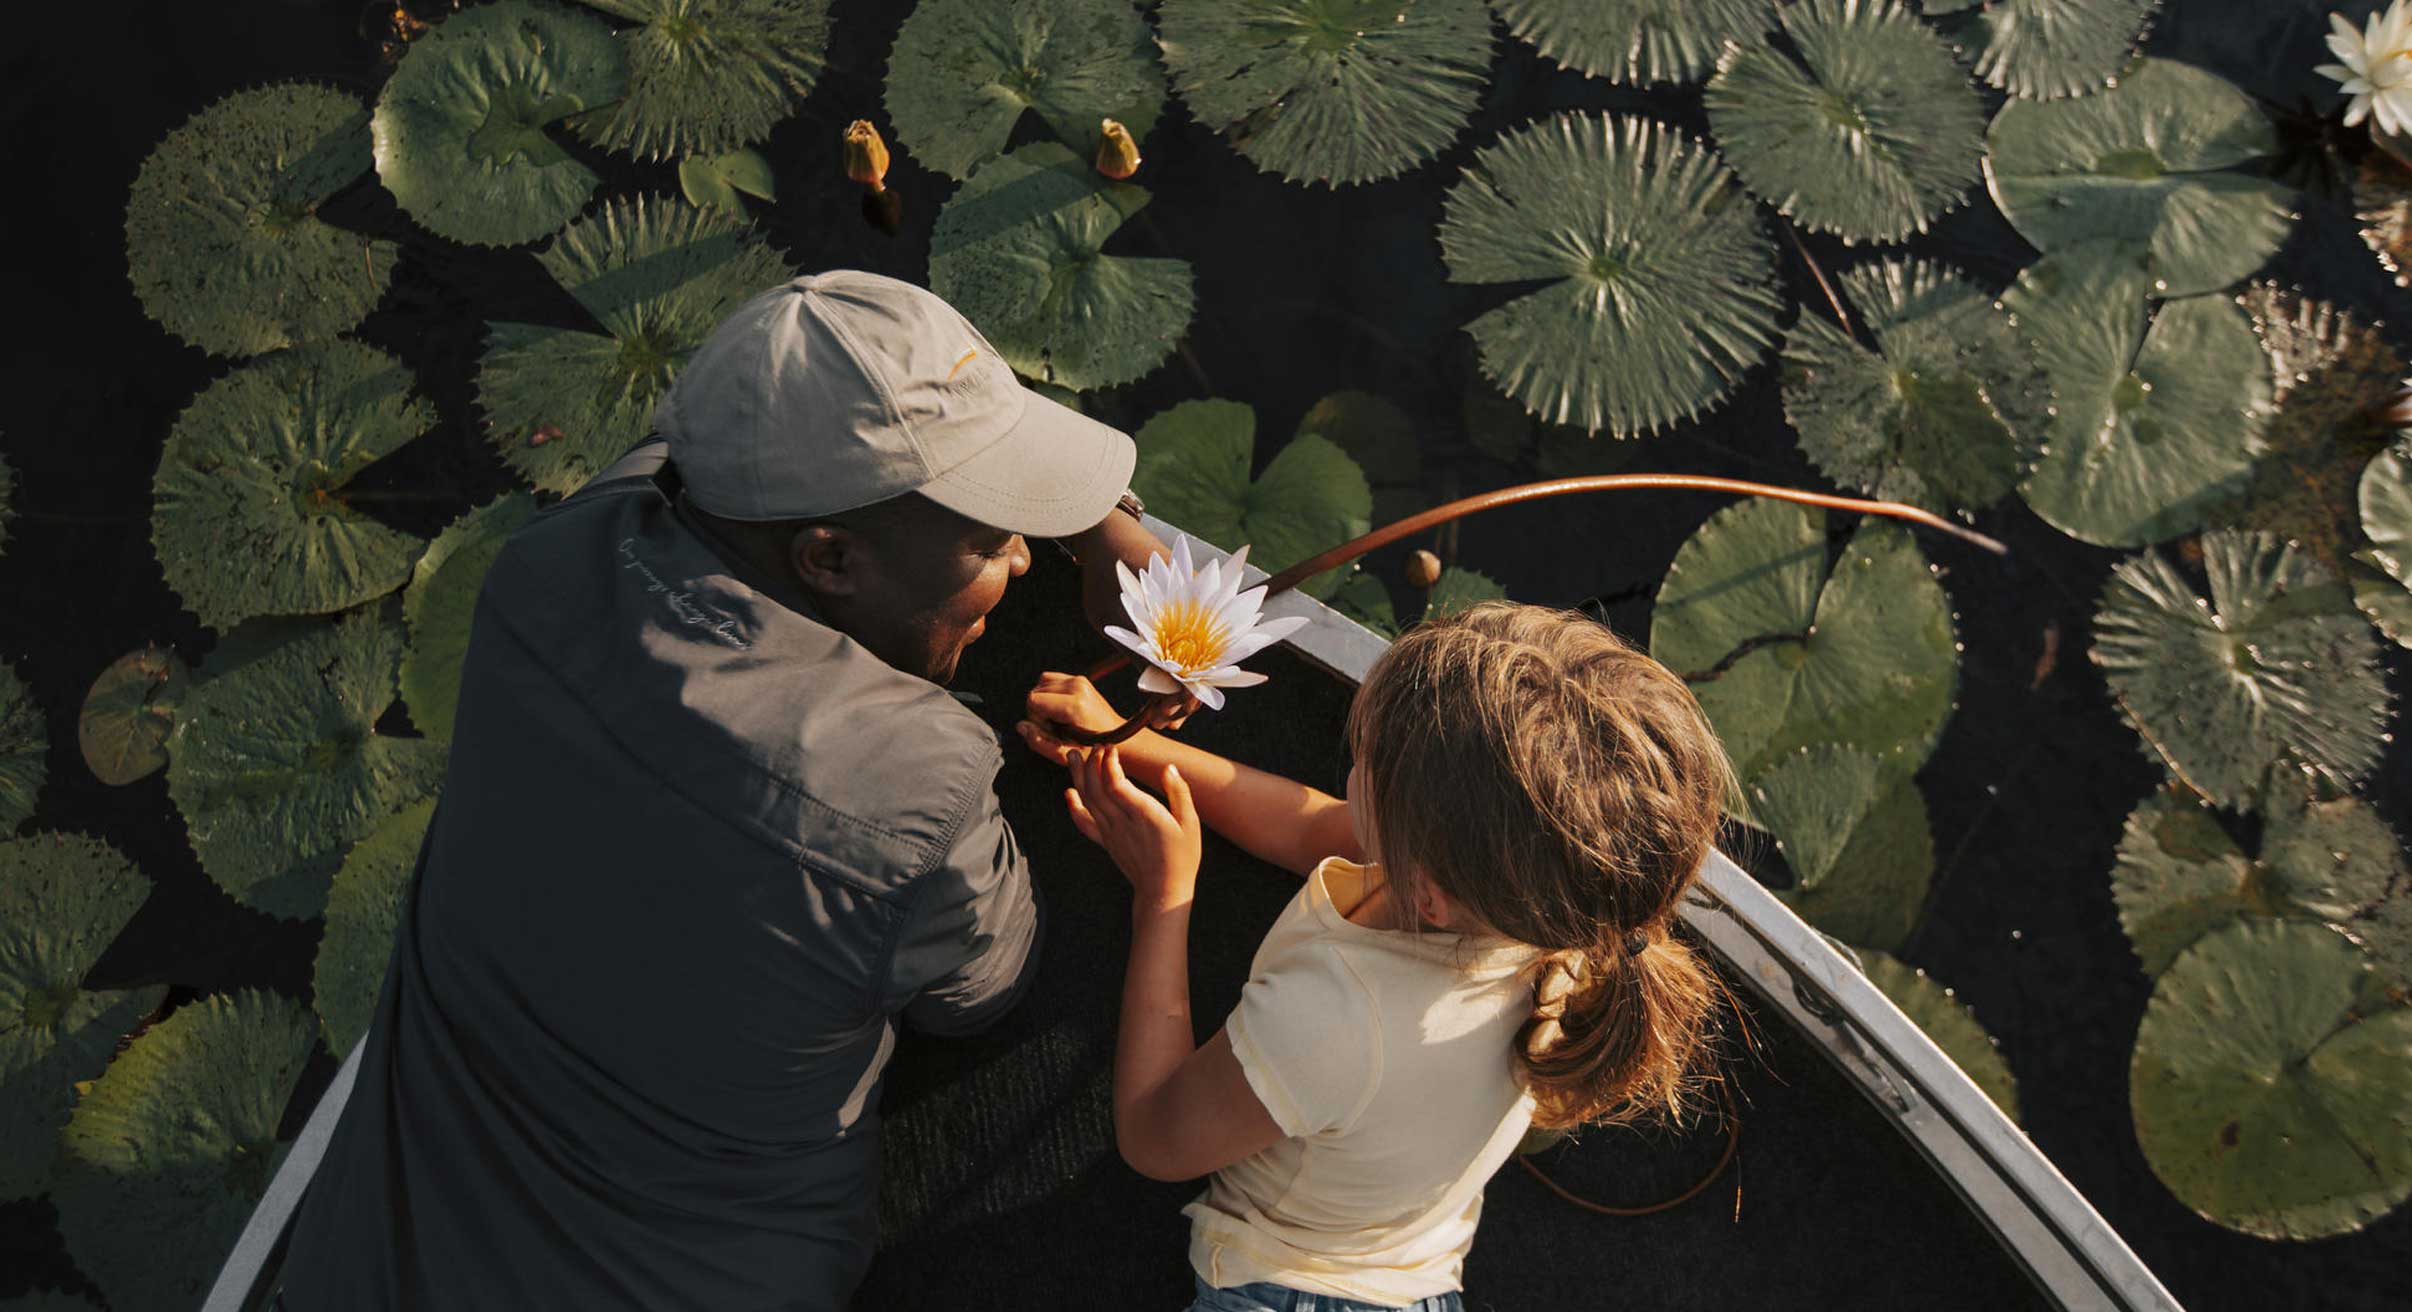 Guide explaining to child about the water lilies in Okavango Delta, Botswana